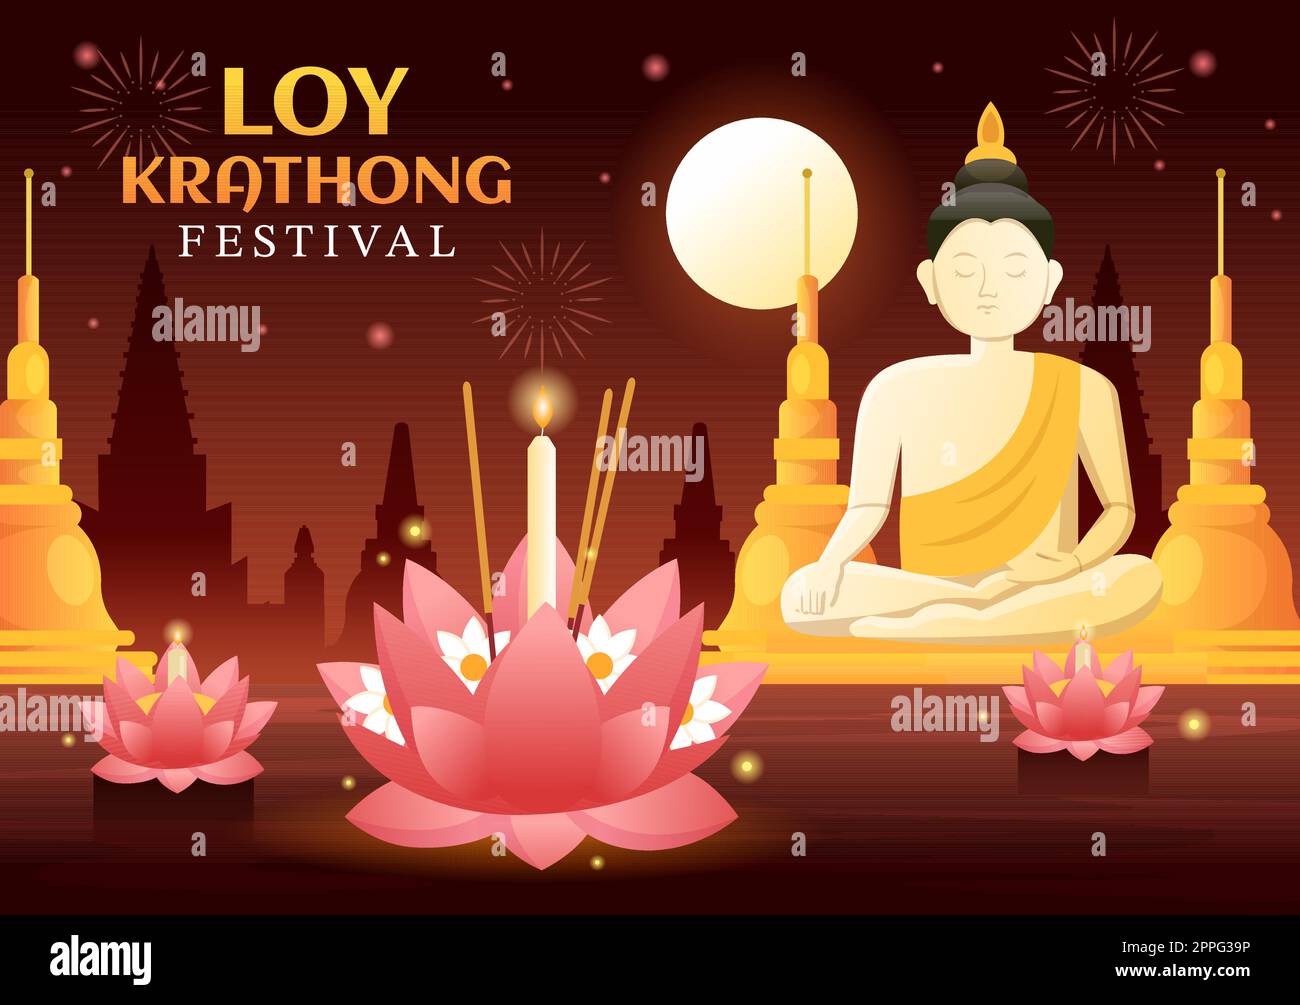 Festival di Loy Krathong Celebration in Thailandia Template Hand Drawed Cartoon Flat Illustration with Lanterns and Krathongs Floating on Water Design Illustrazione Vettoriale